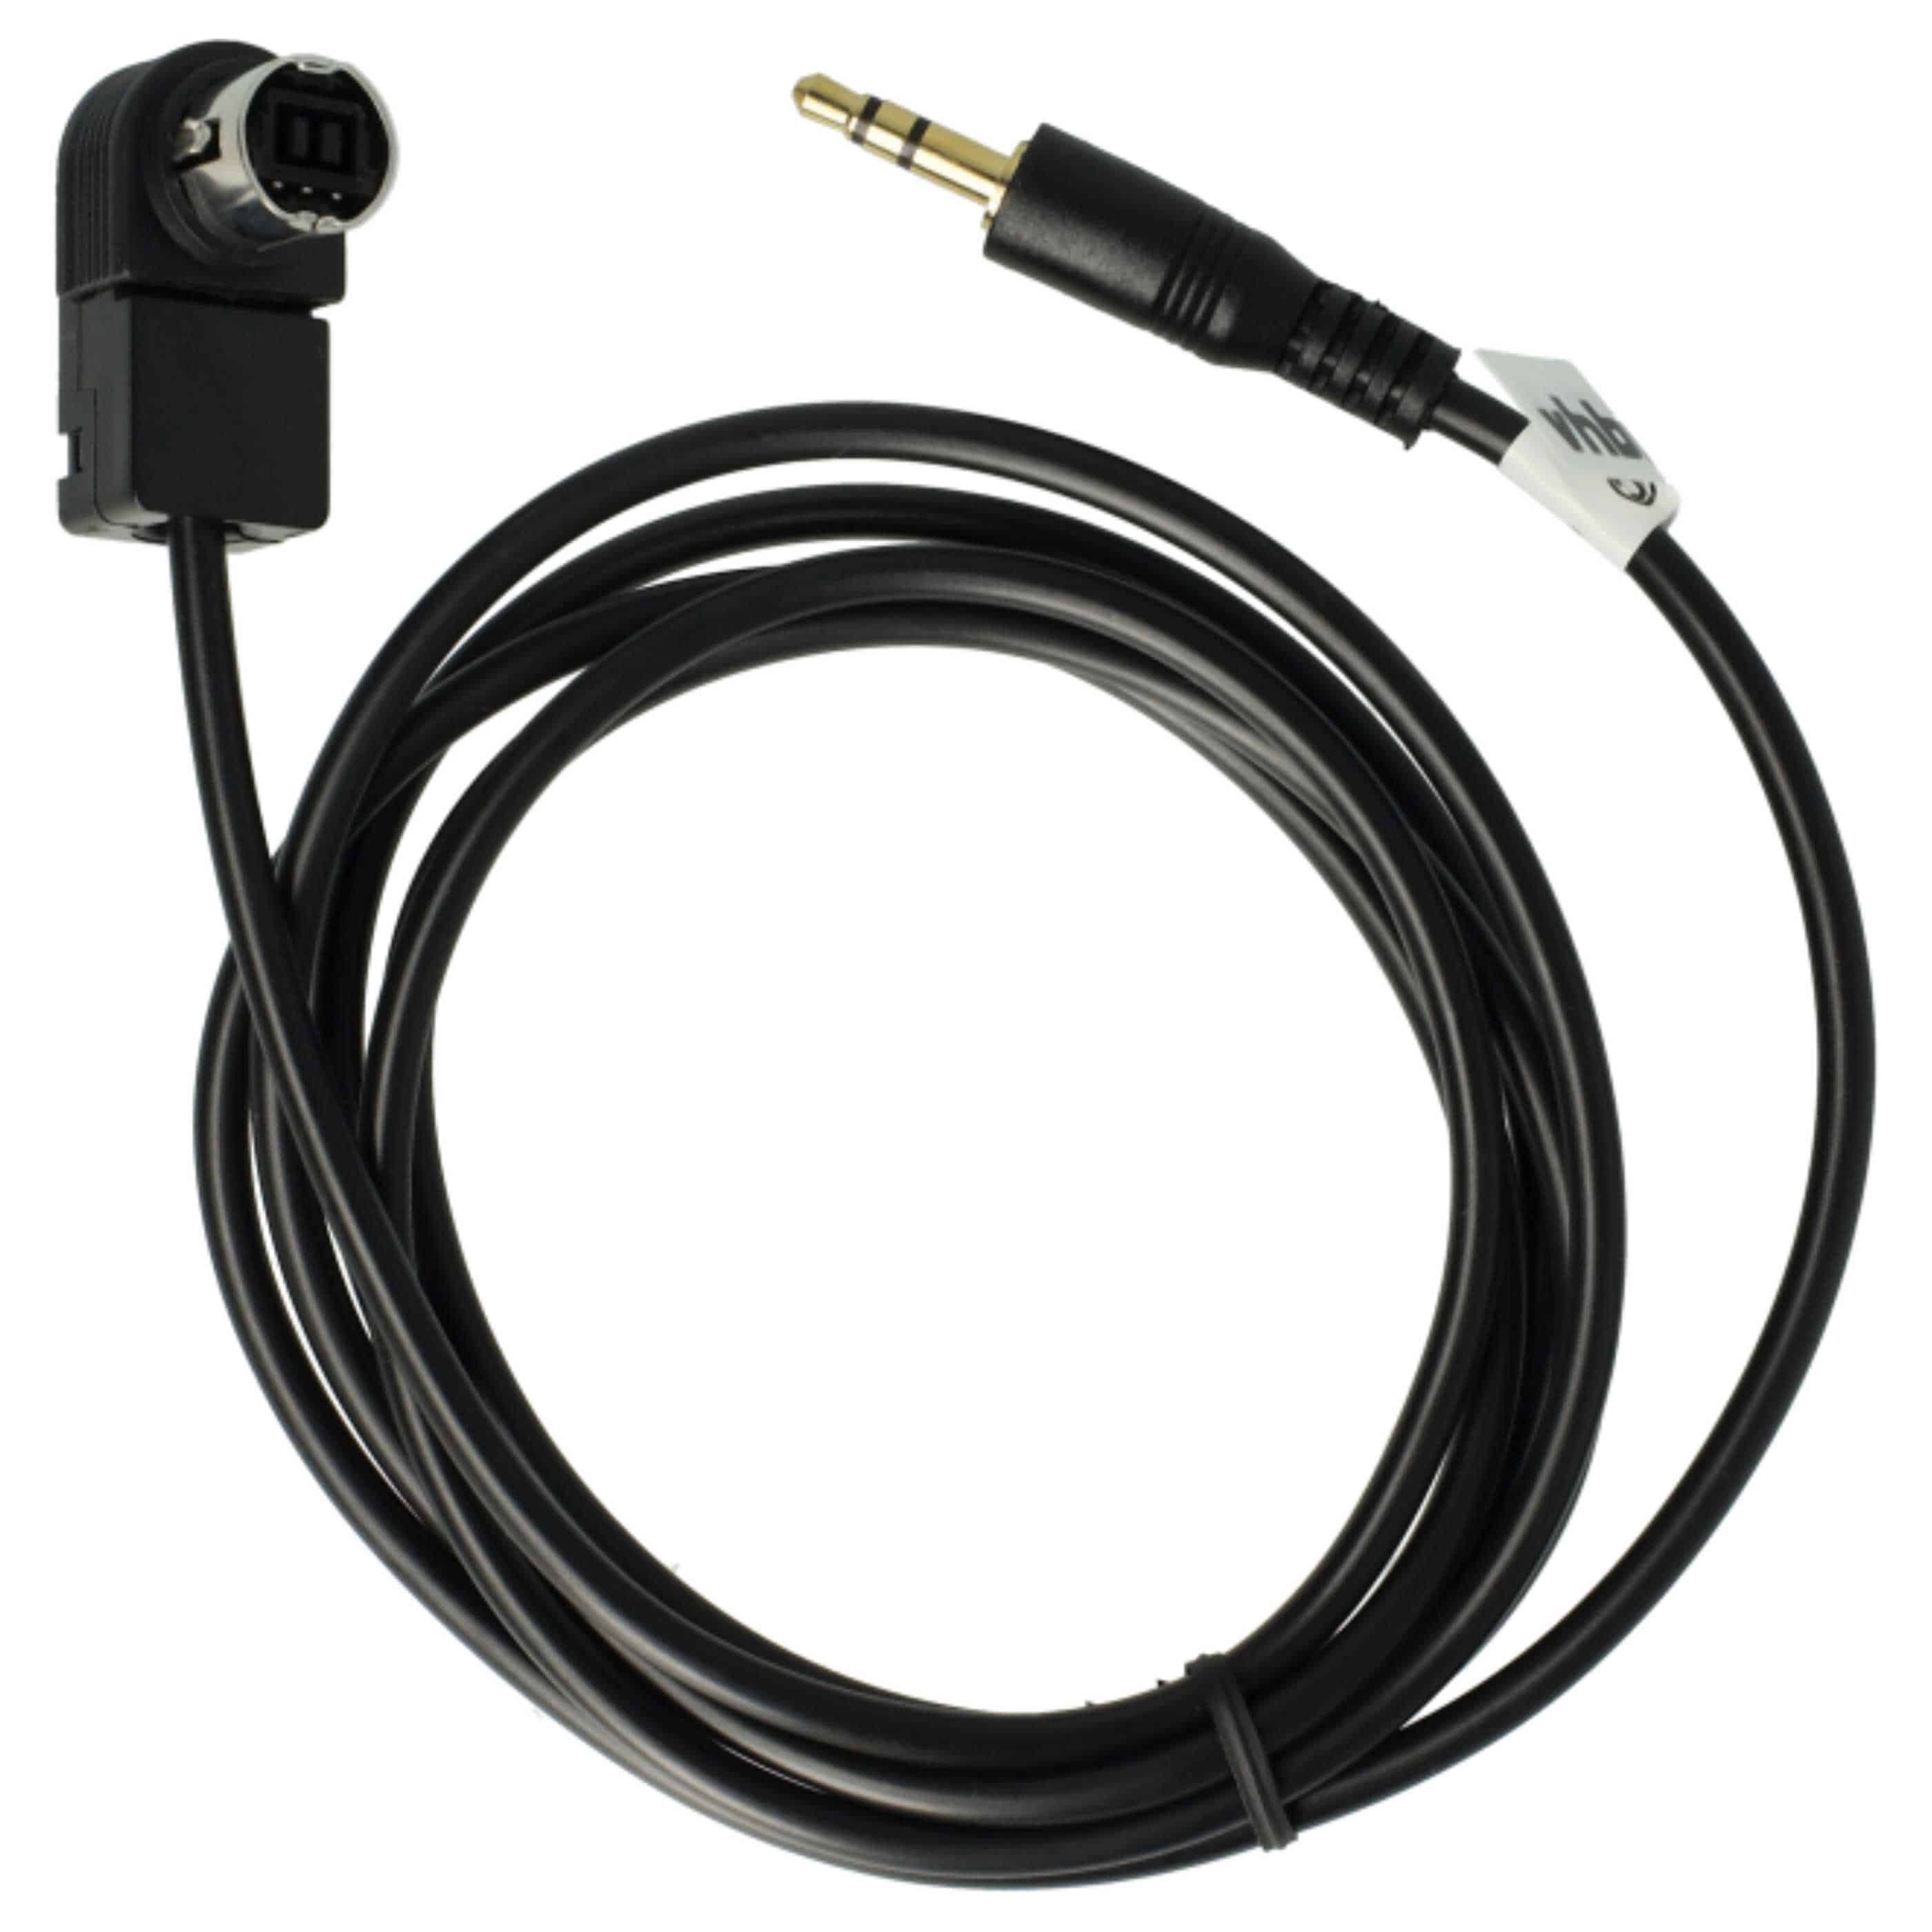 AUX Audio Adapter Cable as Replacement for JVC KS-U58 Car Radio